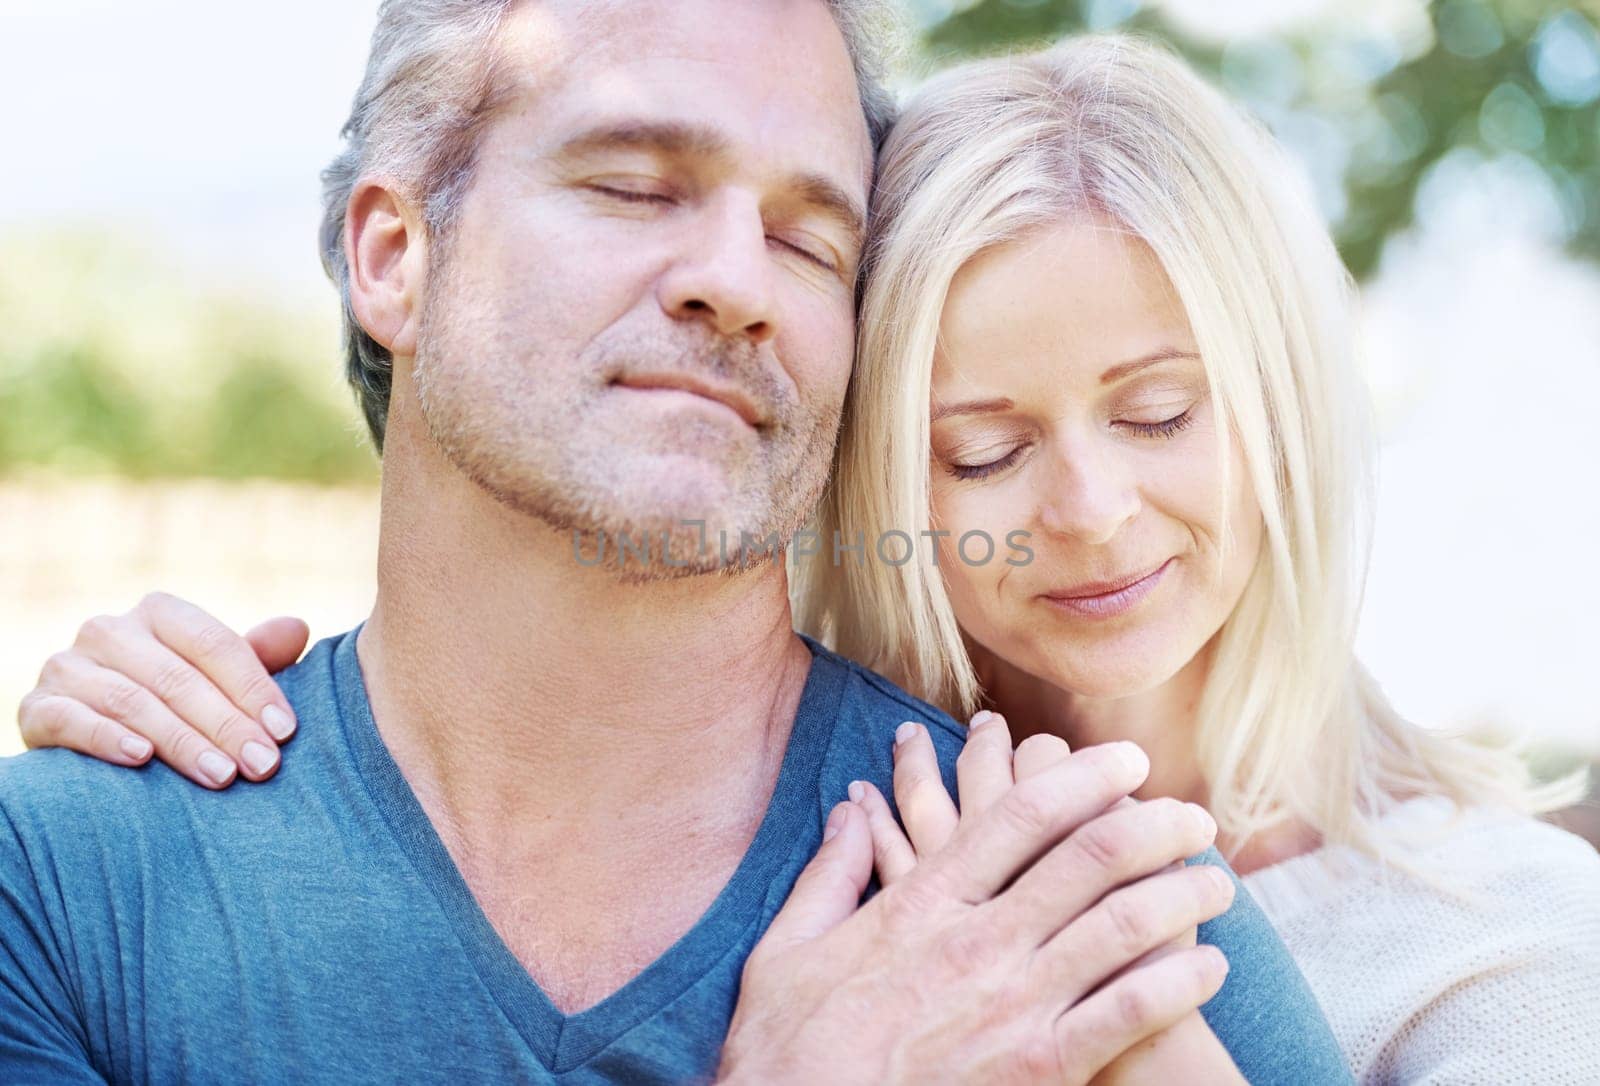 Love, hug and senior couple in park for bonding, relationship and commitment outdoors on weekend. Eyes closed, retirement and mature man and woman embrace for romance, relaxing and marriage in nature.